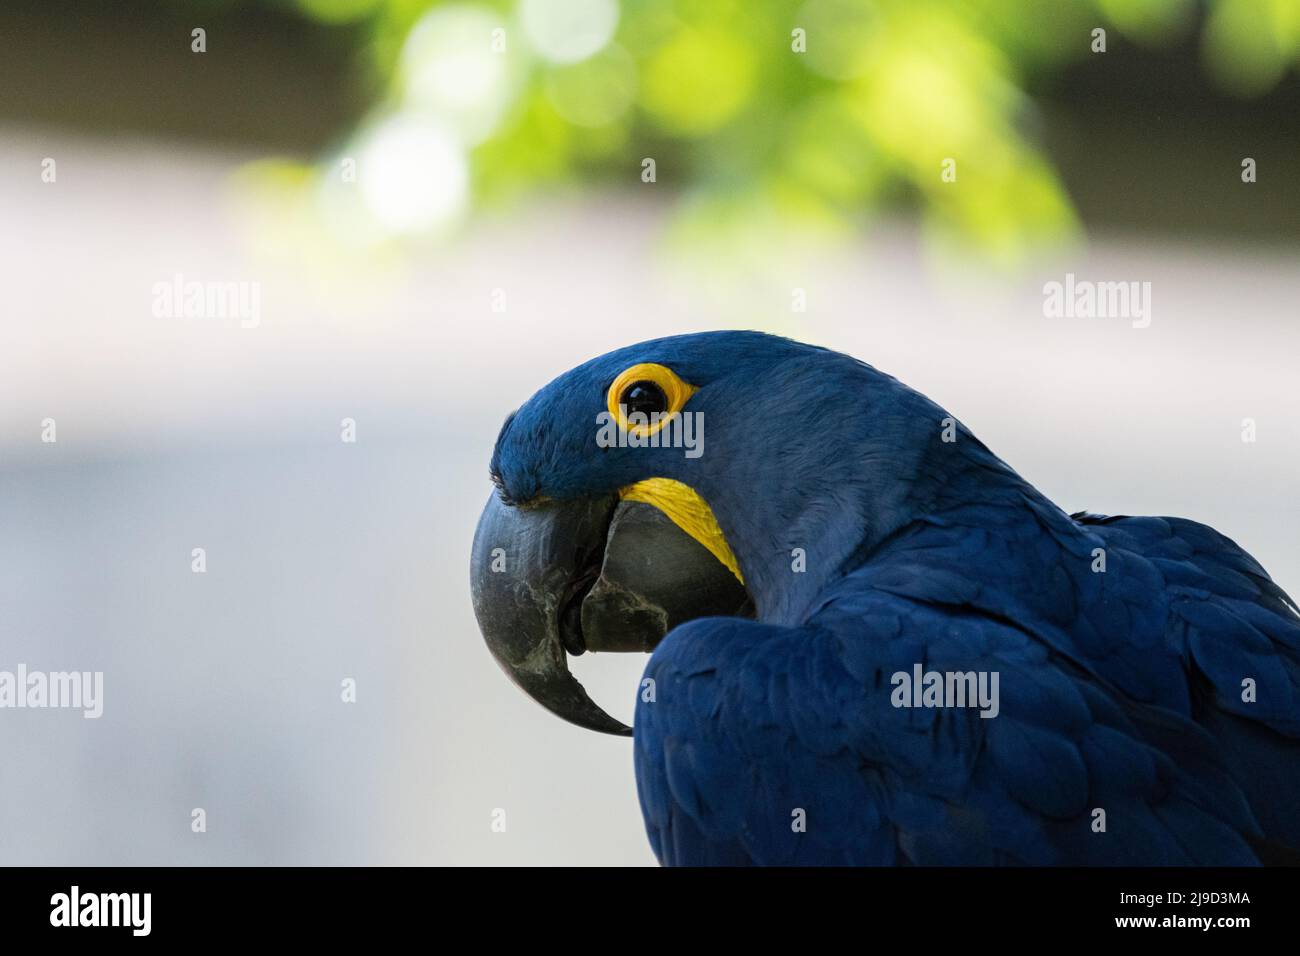 Closeup profile of a beautiful blue and yellow Hyacinth Macaw showing off its large, curved beak as it turns its head to look to the side. Stock Photo